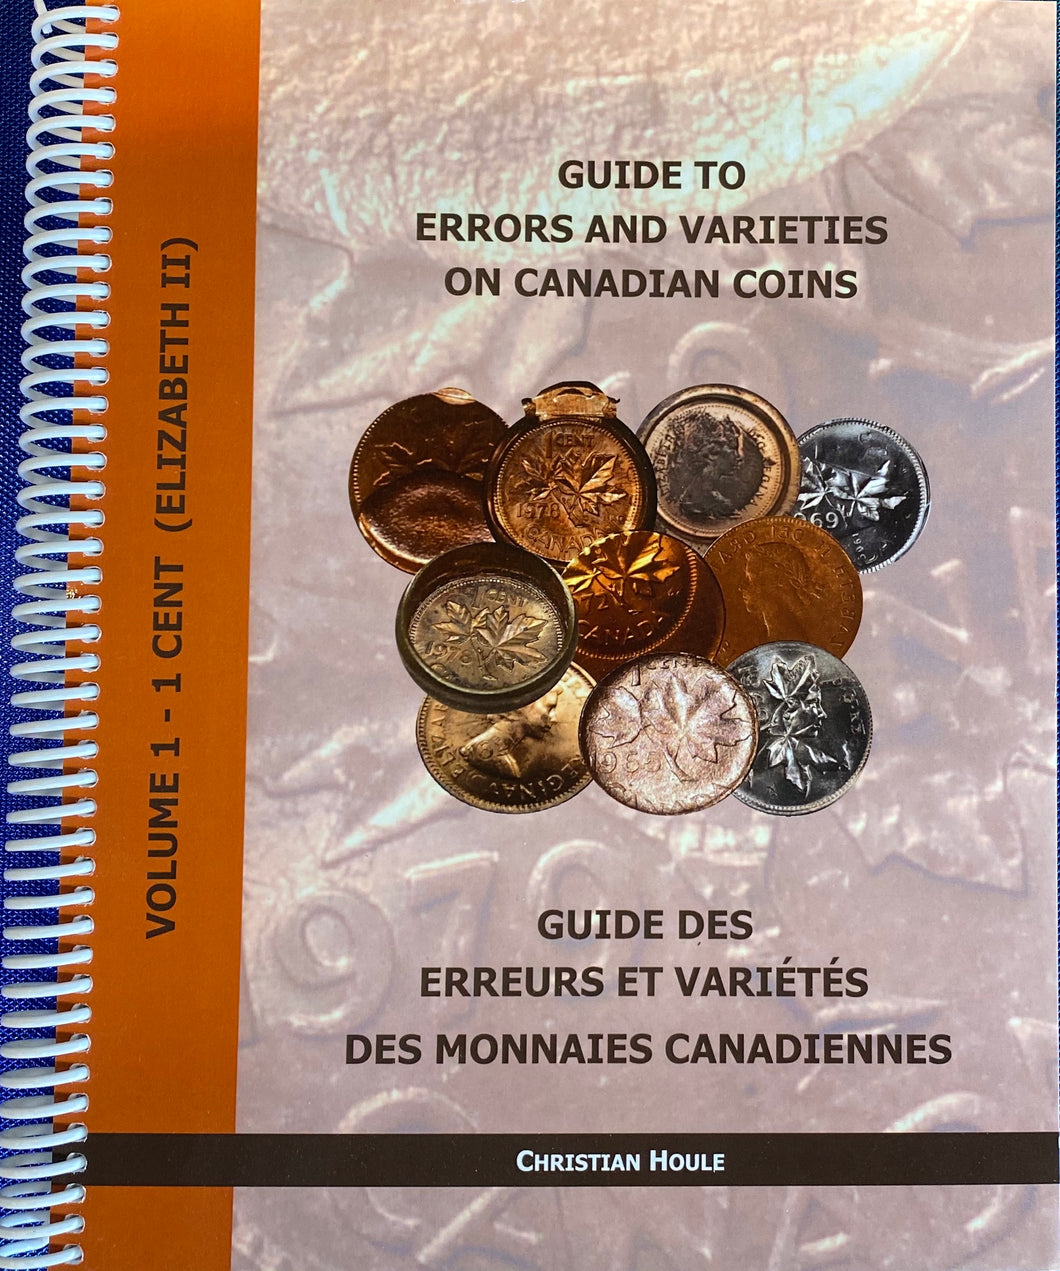 Guide to Errors and Varieties-Volume 1-1 Cent Elizabeth II-Christian Houle